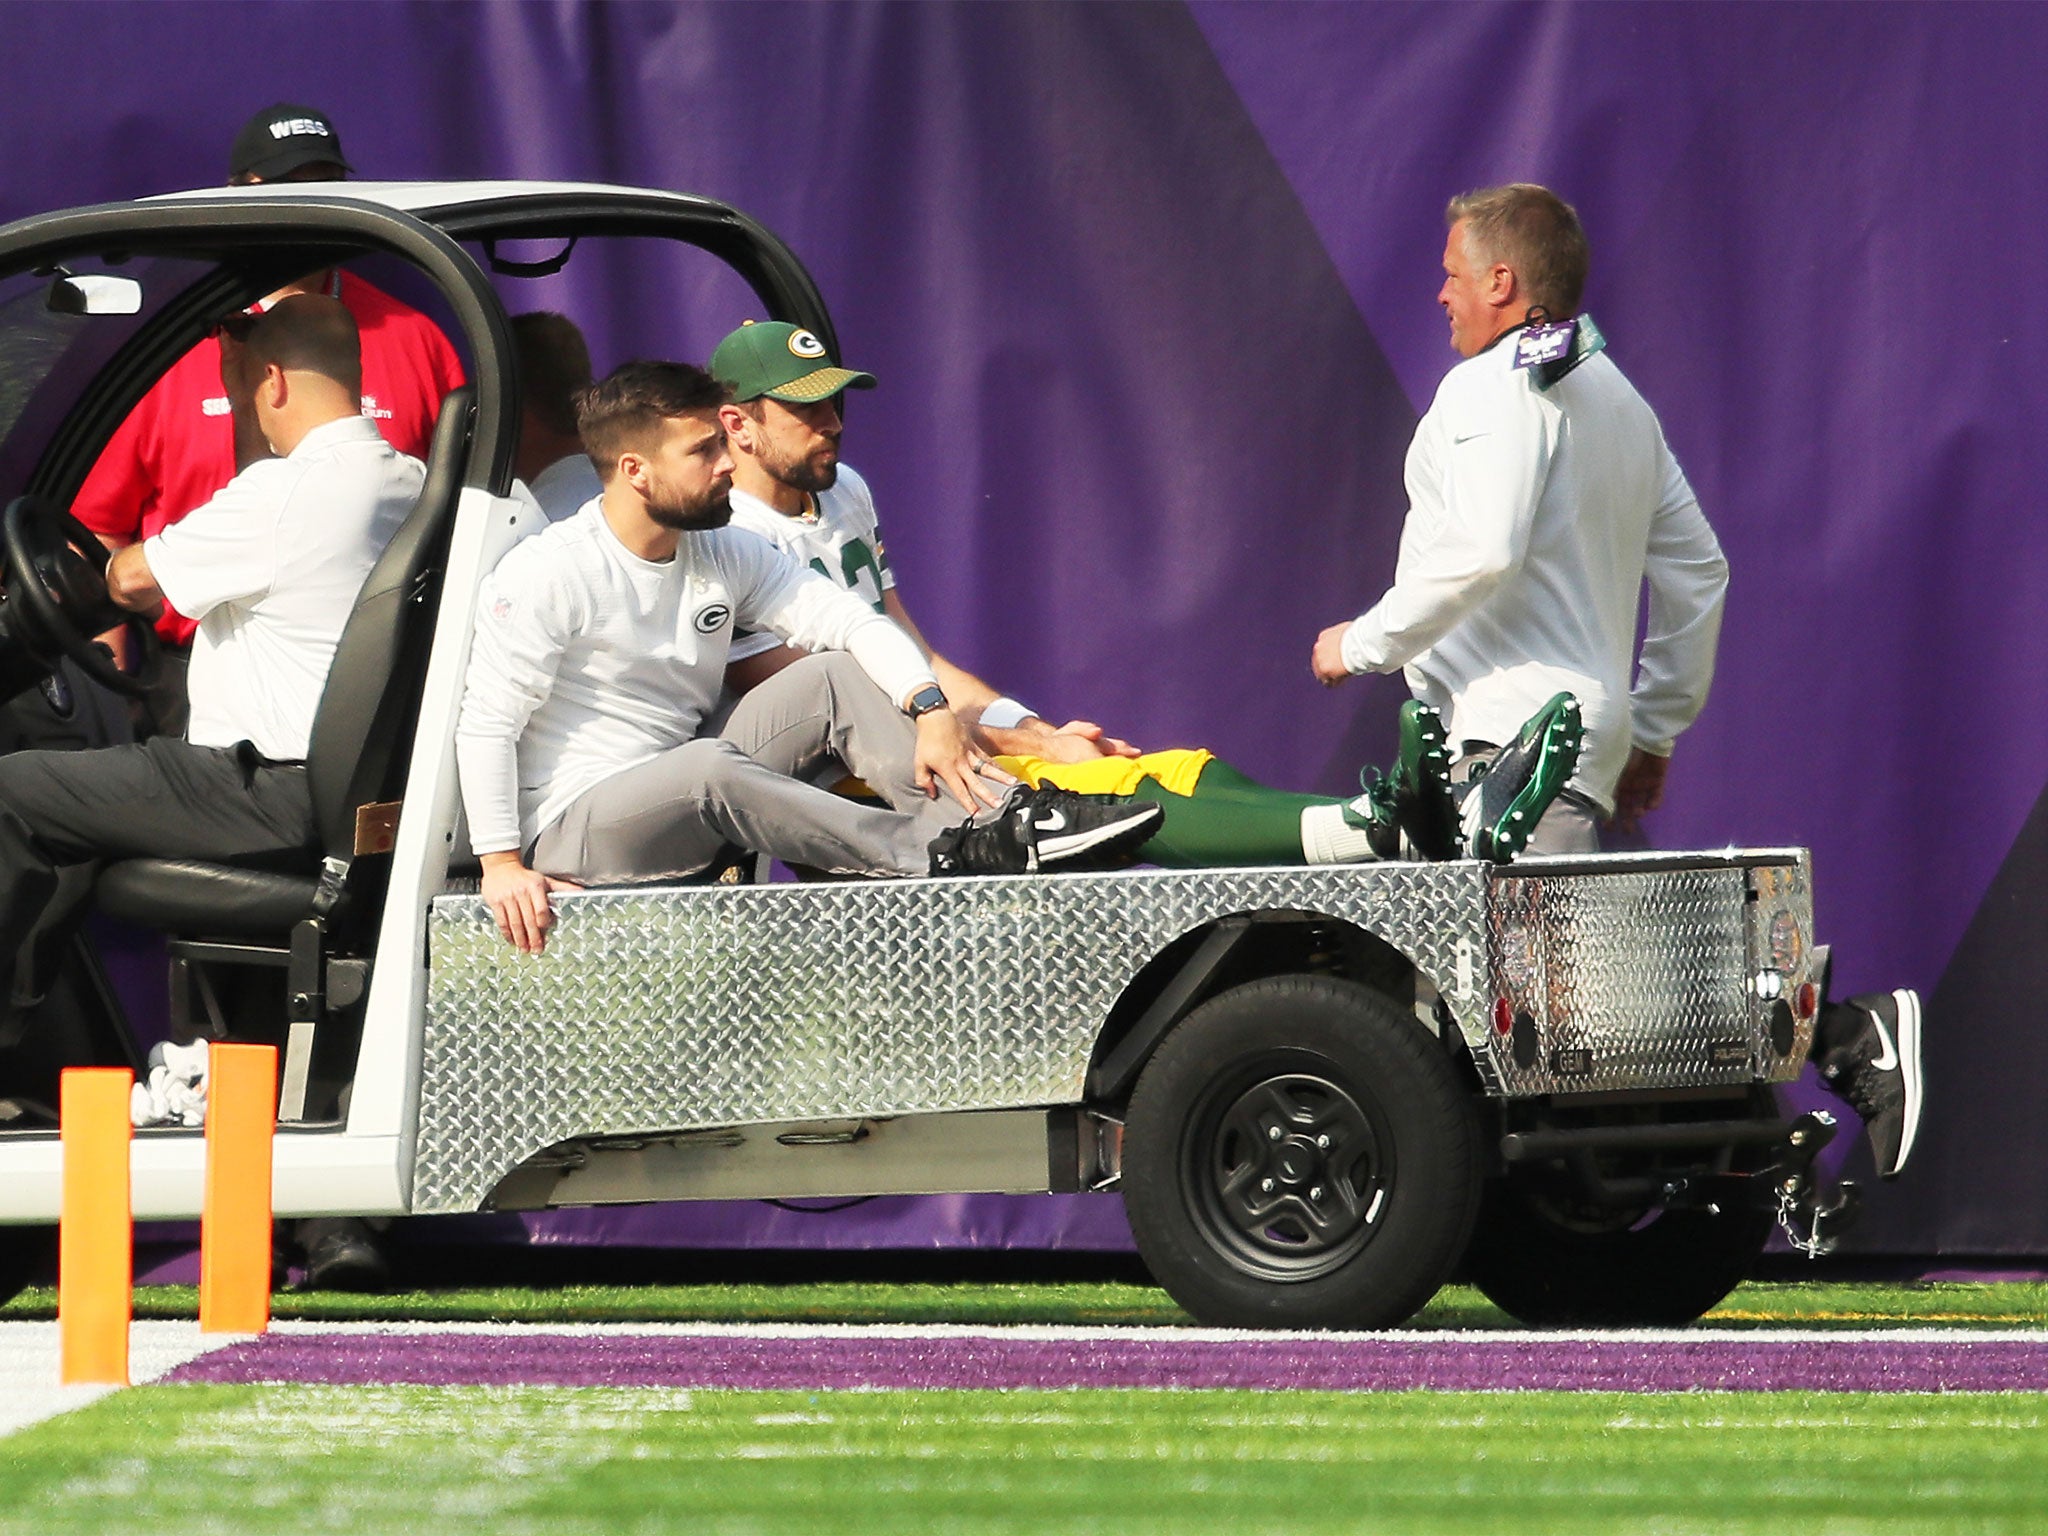 Aaron Rodgers is taken off injured on a cart after breaking his collarbone